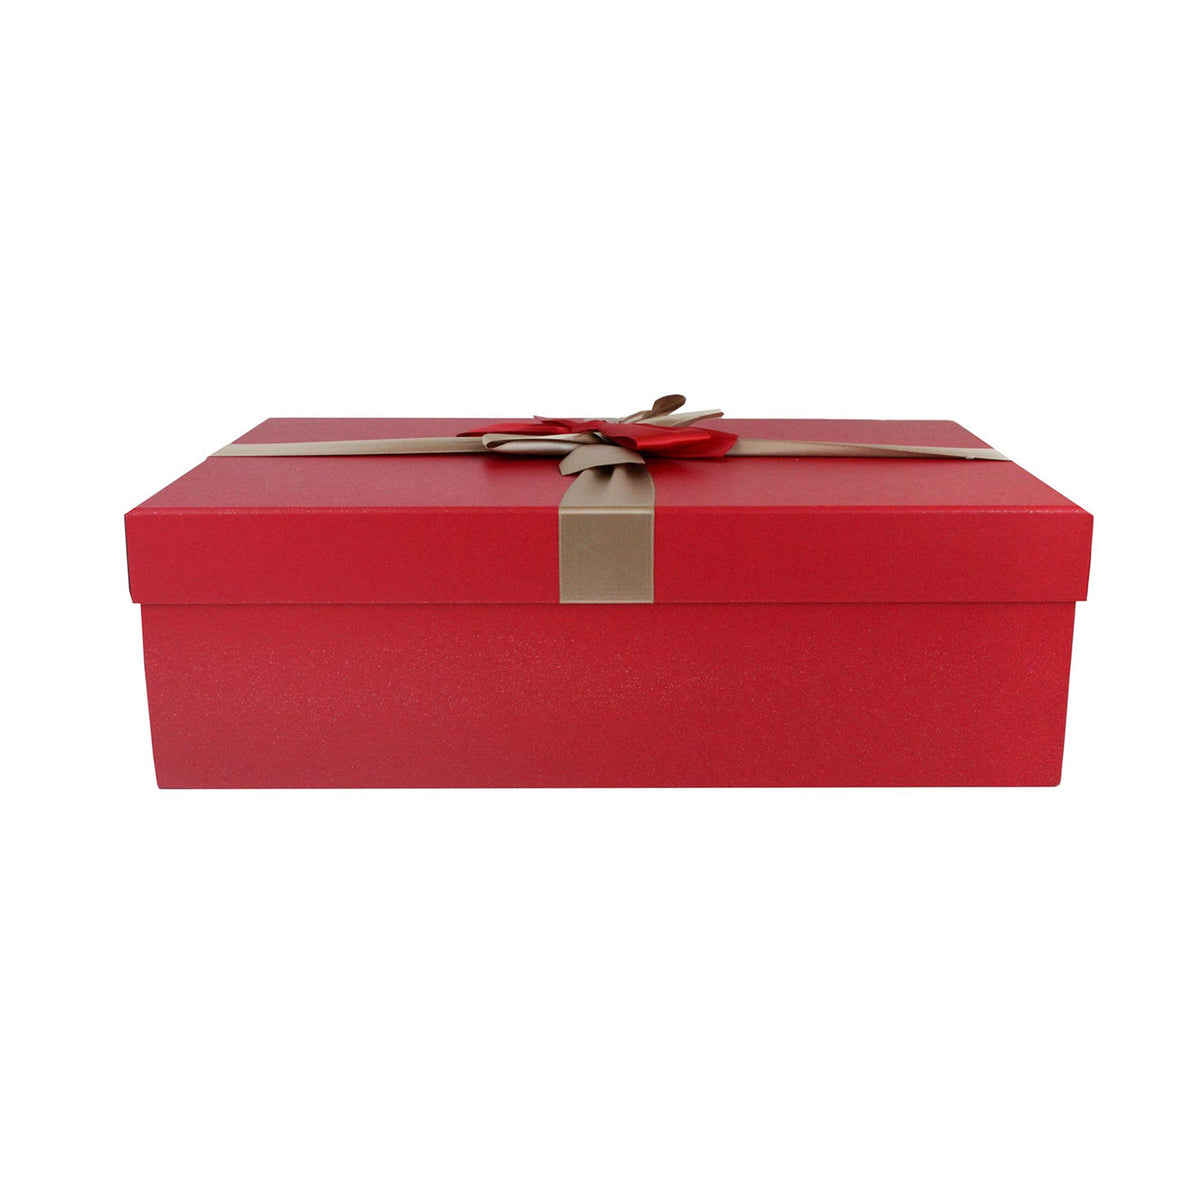 Luxury Red Gift Box - Single (Sizes Available)